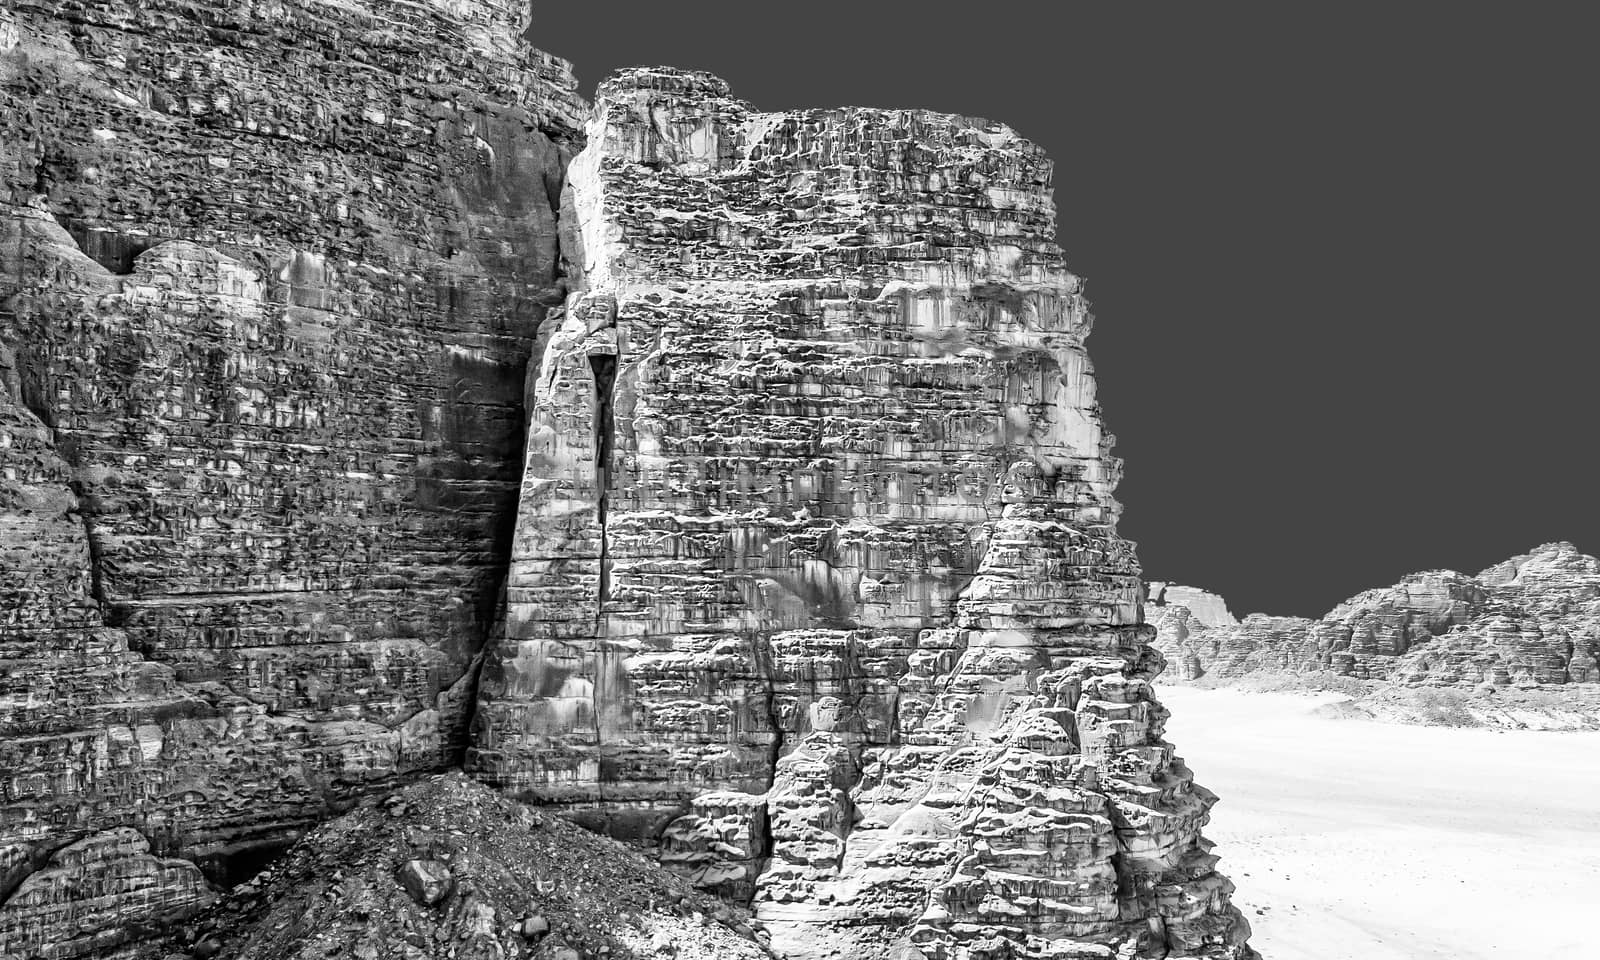 Black and white processed image of a large rock of the mountains in the desert of Wadi Rum, Jordan by geogif